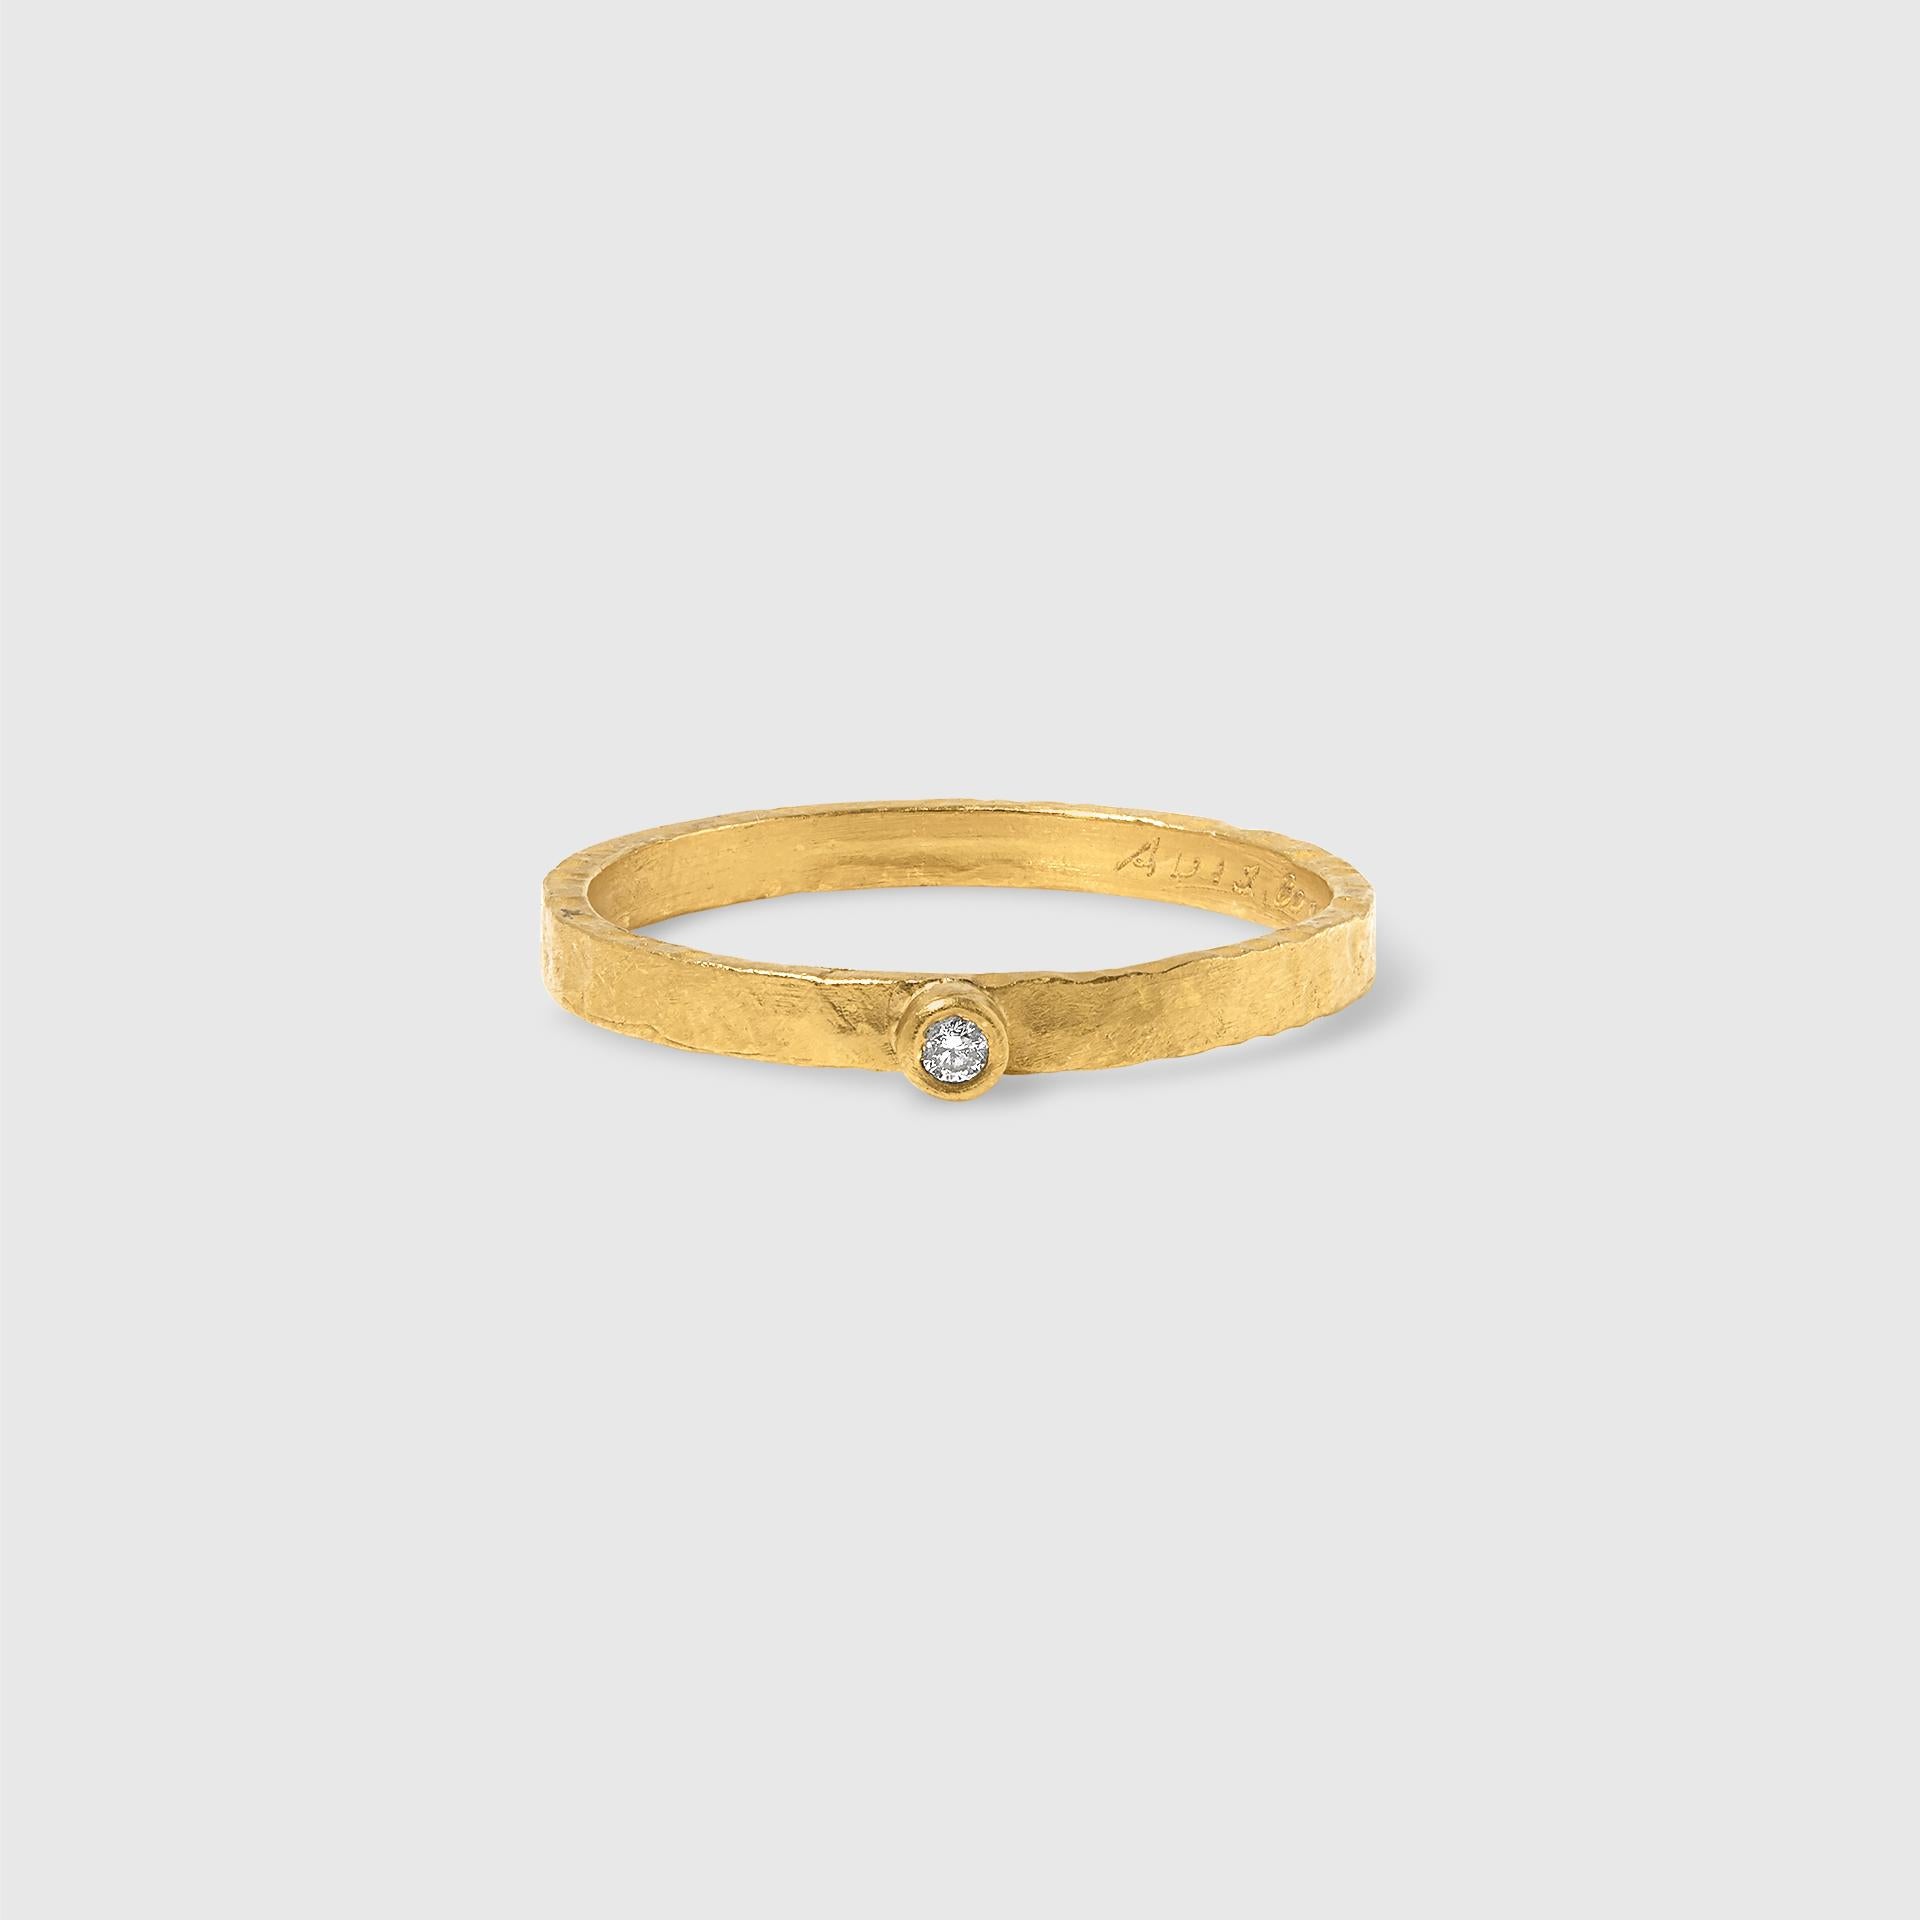 24kt yellow gold (solid) with Single Diamond, Stackable Ring, Handmade by Prehistoric Works of Istanbul, Turkey, Ring: 24K Gold G995 - 2.88 grams (each), 1 Diamond - 0.02 carats.  Listing is for one ring only.
(2 available in size 7.25). Perfect for